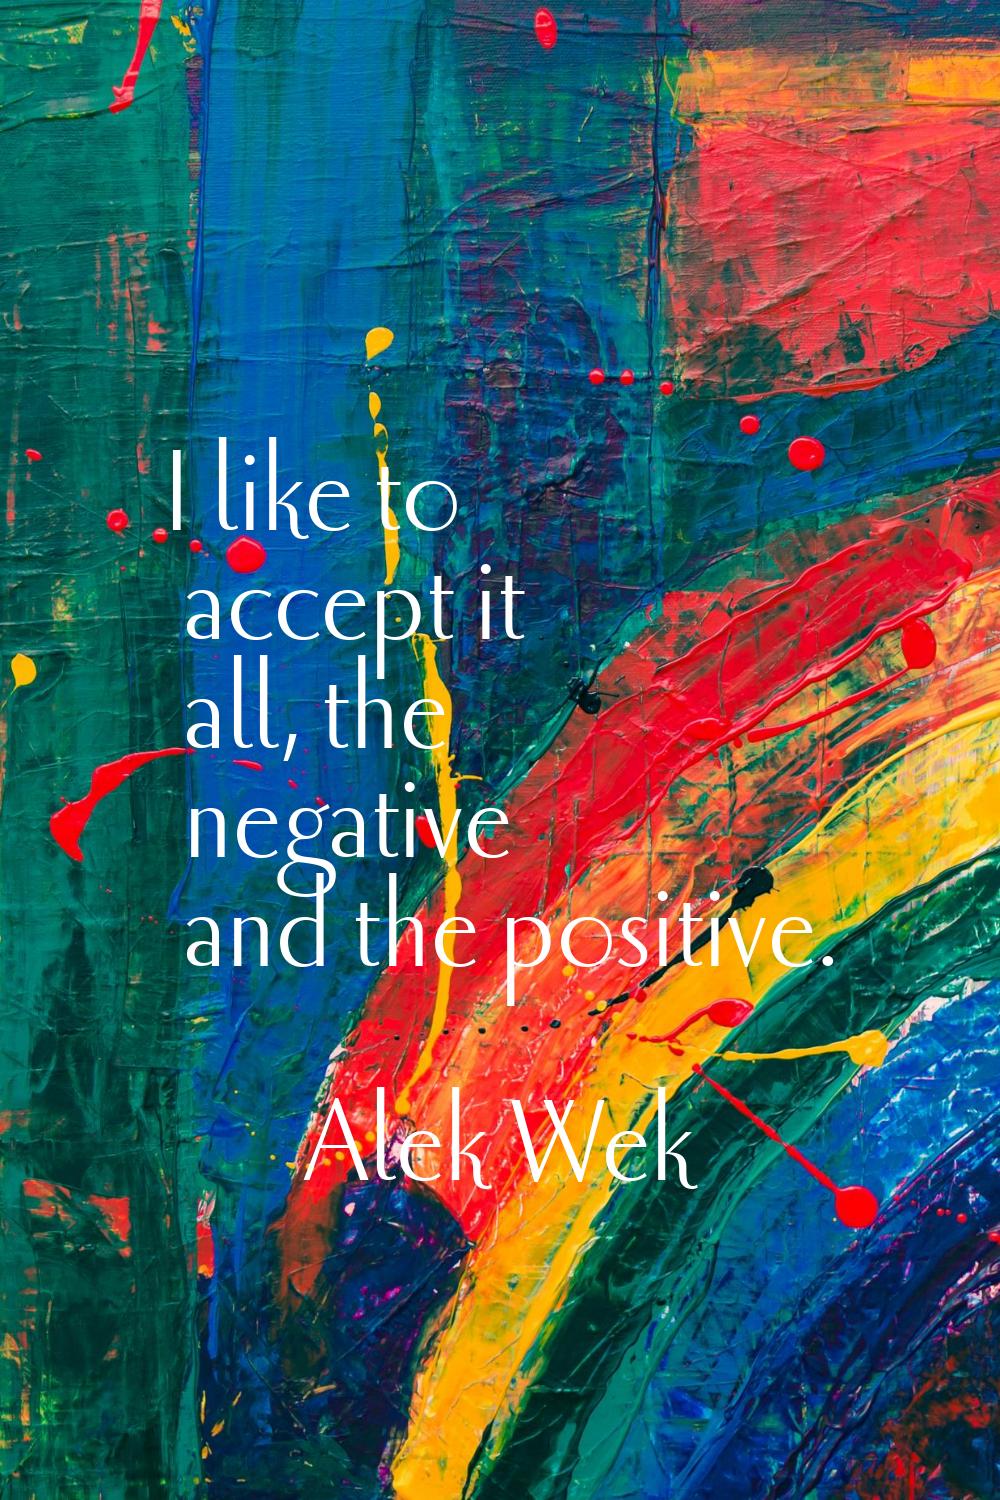 I like to accept it all, the negative and the positive.